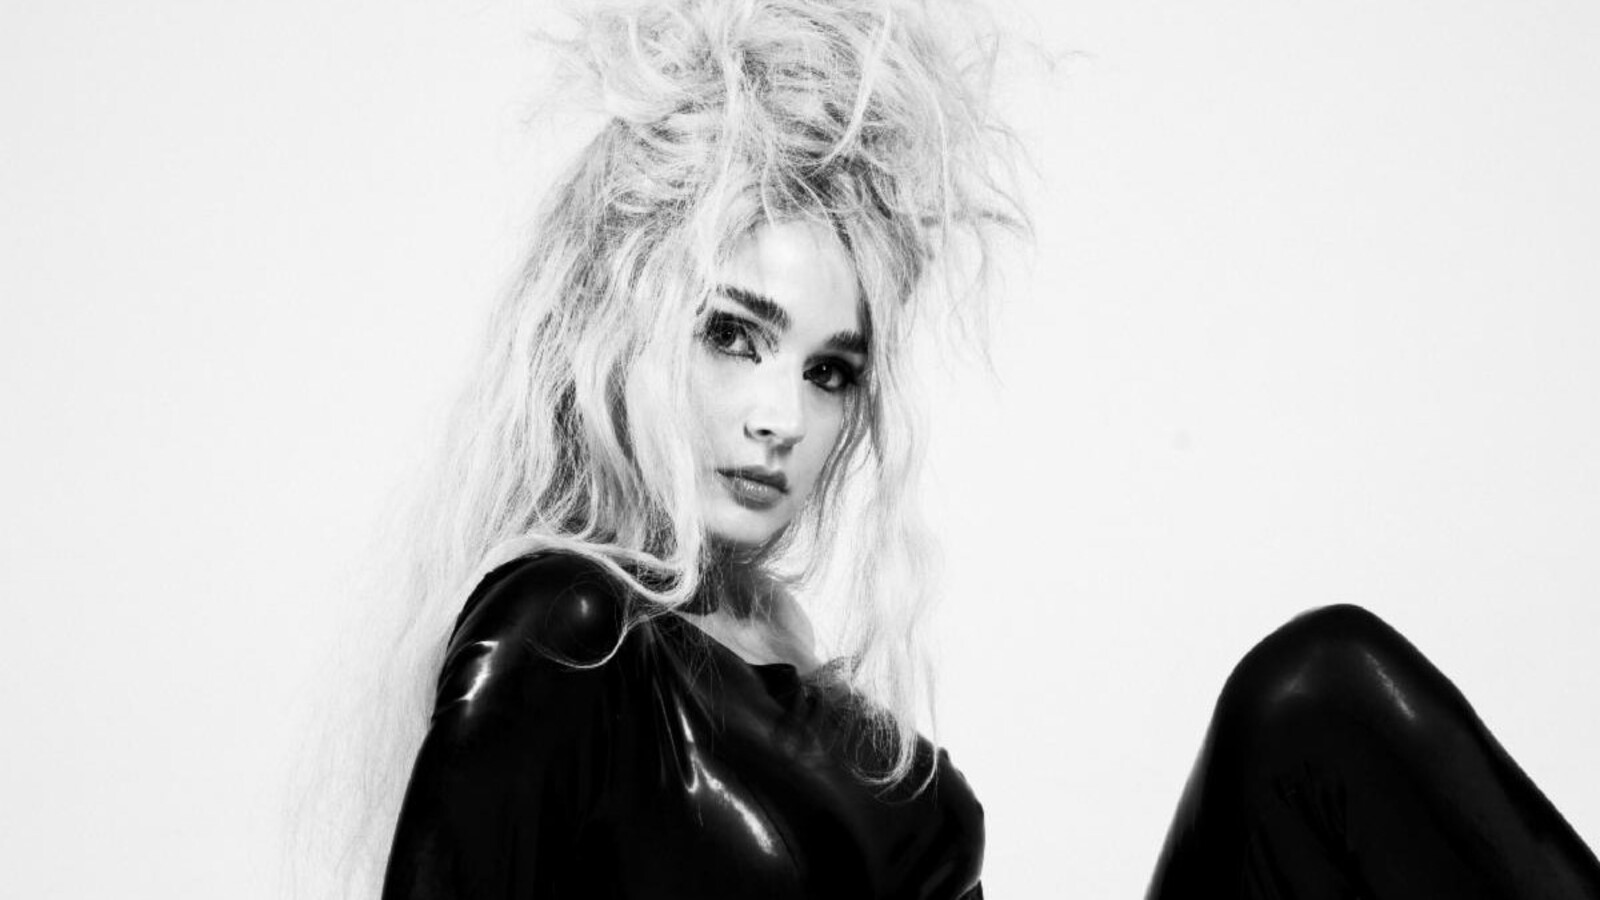 Poppy Announces Summer 2023 North American Tour With PVRIS